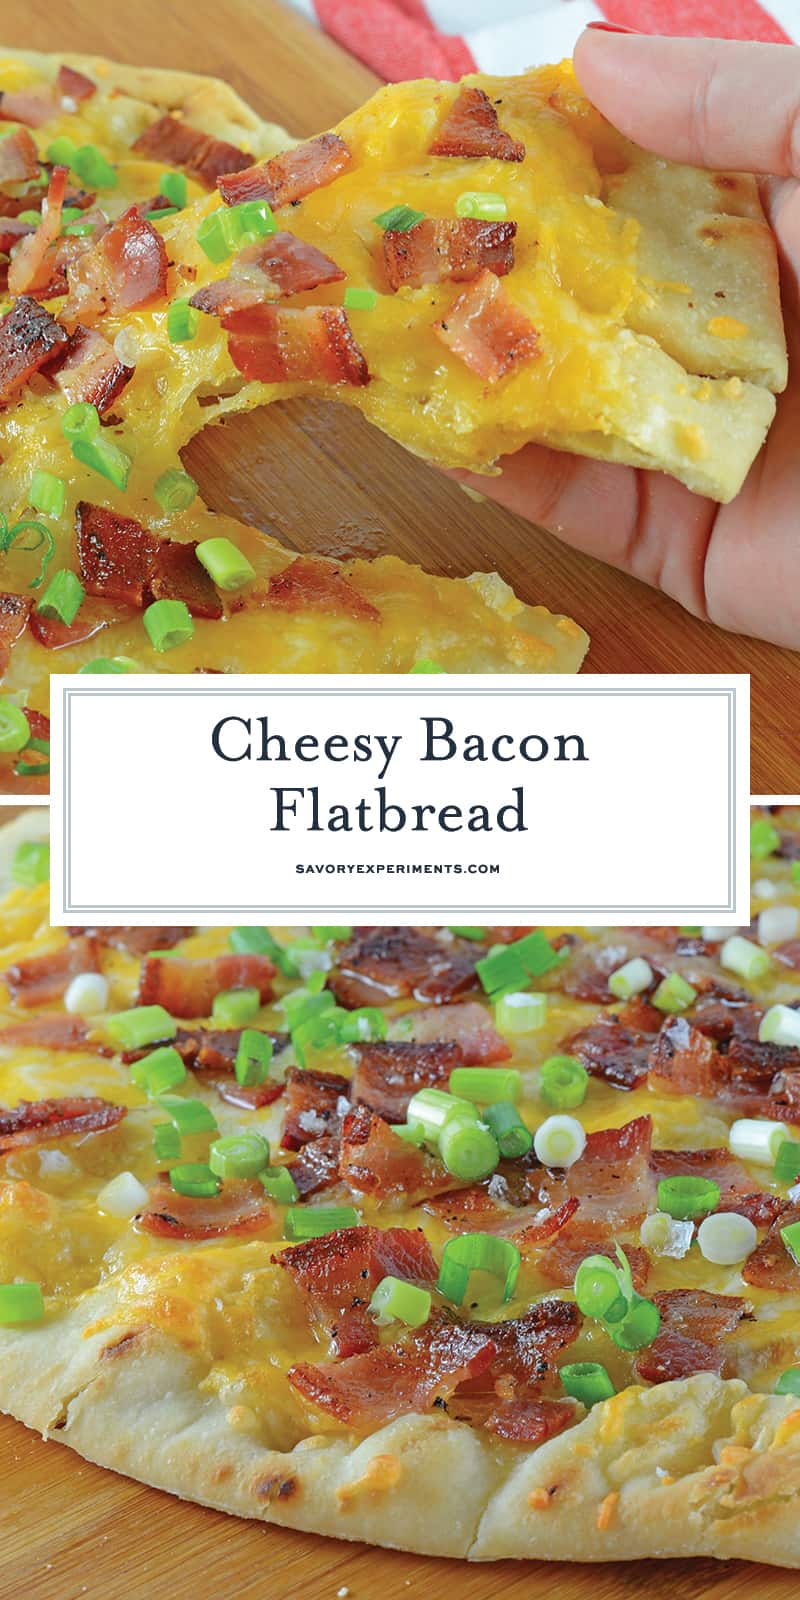 Bacon Cheddar Flatbread Pizza has just the right amount of bacon, cheese and garlic, this is a weeknight dinner that will be requested again and again! #flatbreadpizza www.savoryexperiments.com 